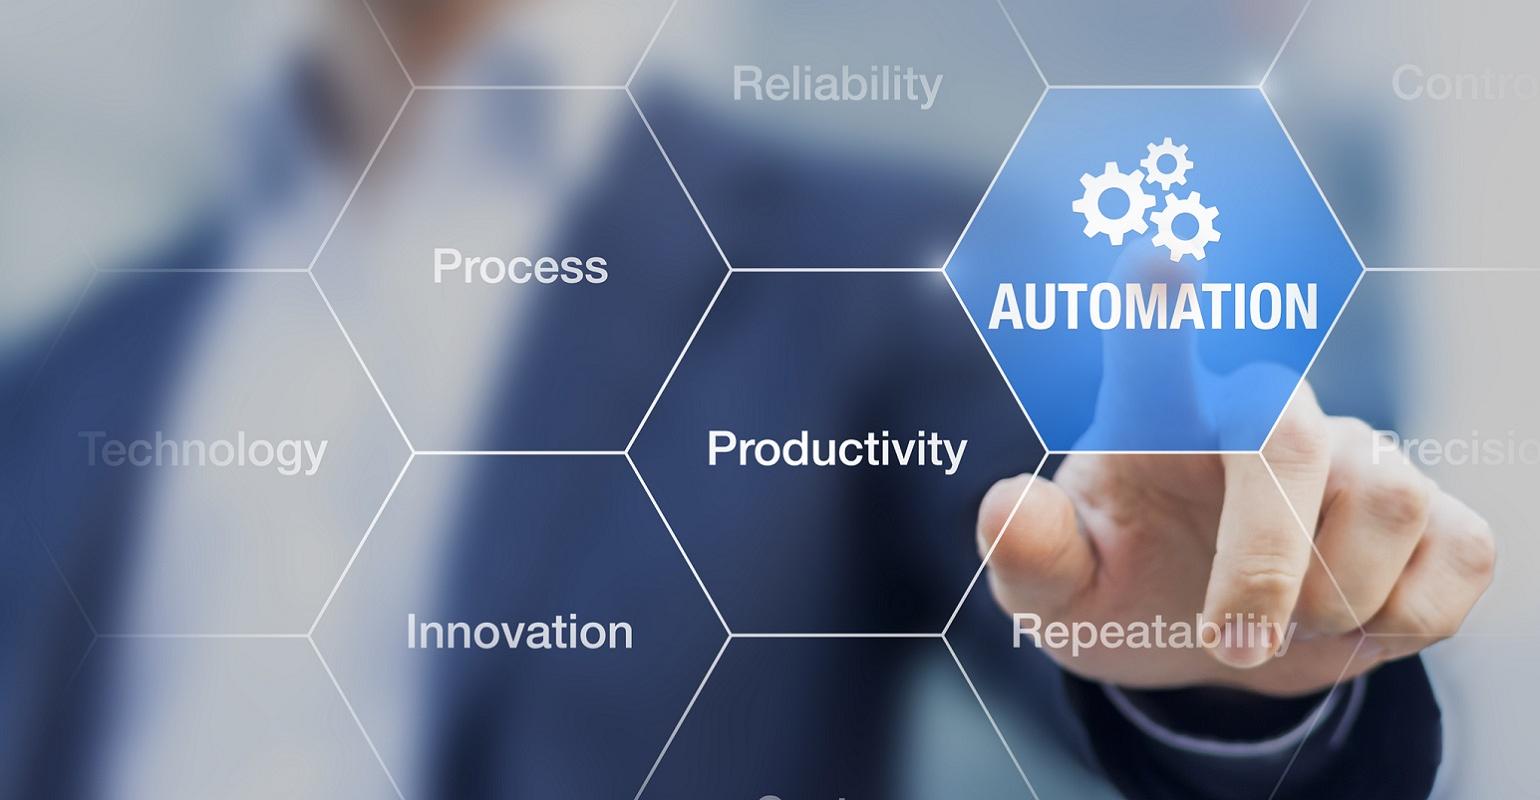 Businessman touching a digital interface with the word "automation" surrounded by related terms like productivity, reliability, innovation, and it operations.